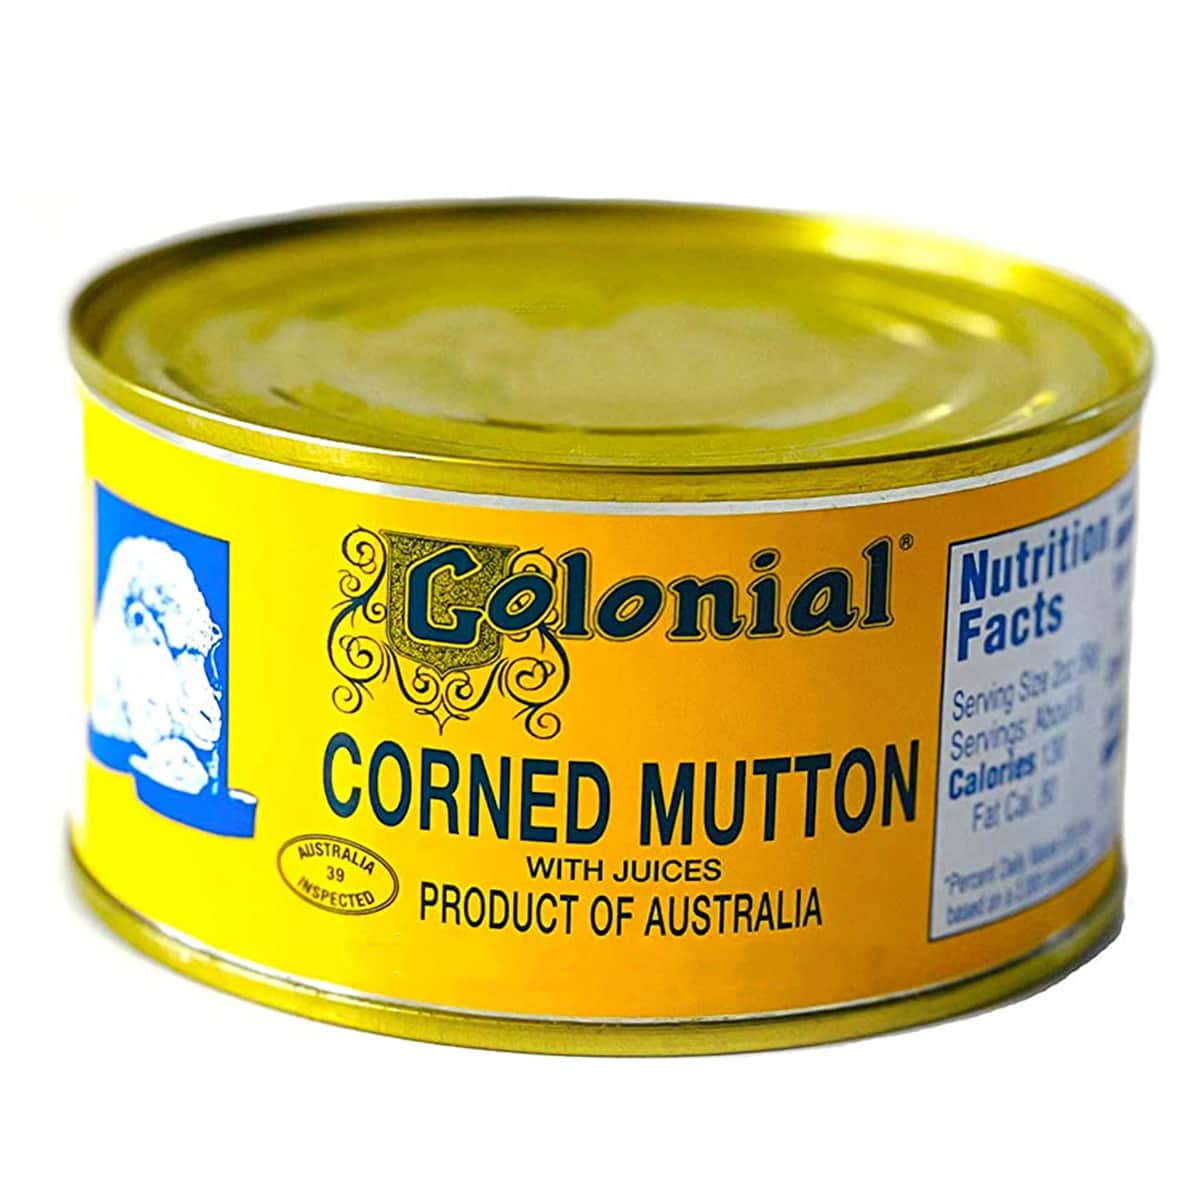 Buy Colonial Corned Mutton with Juices - 340 gm